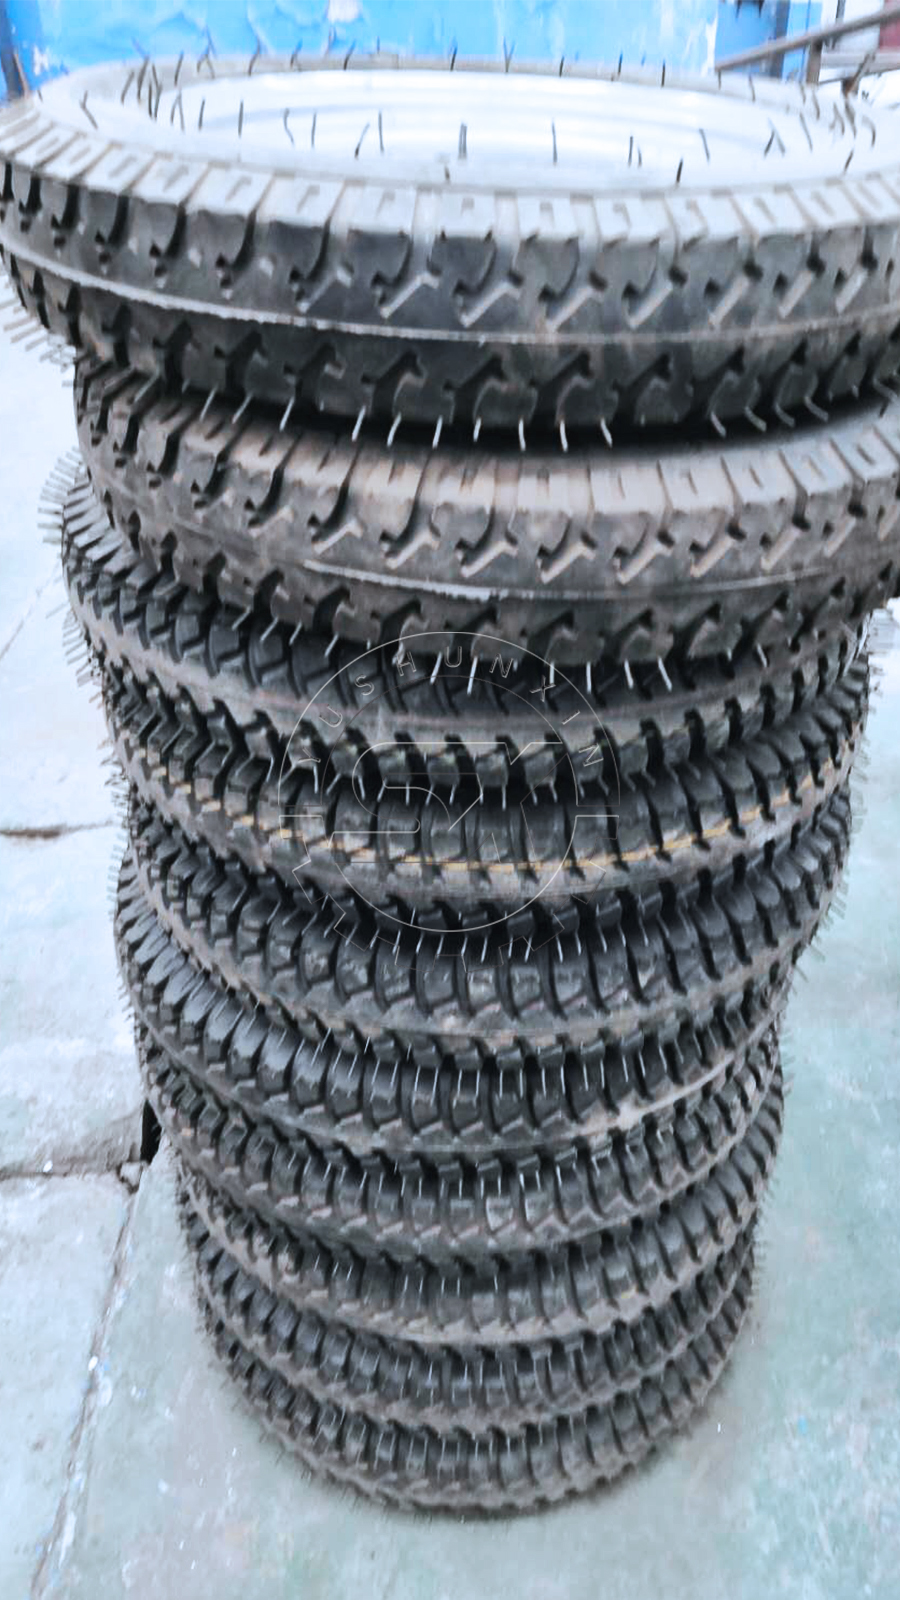 The Tyres of Belt Conveying Machine